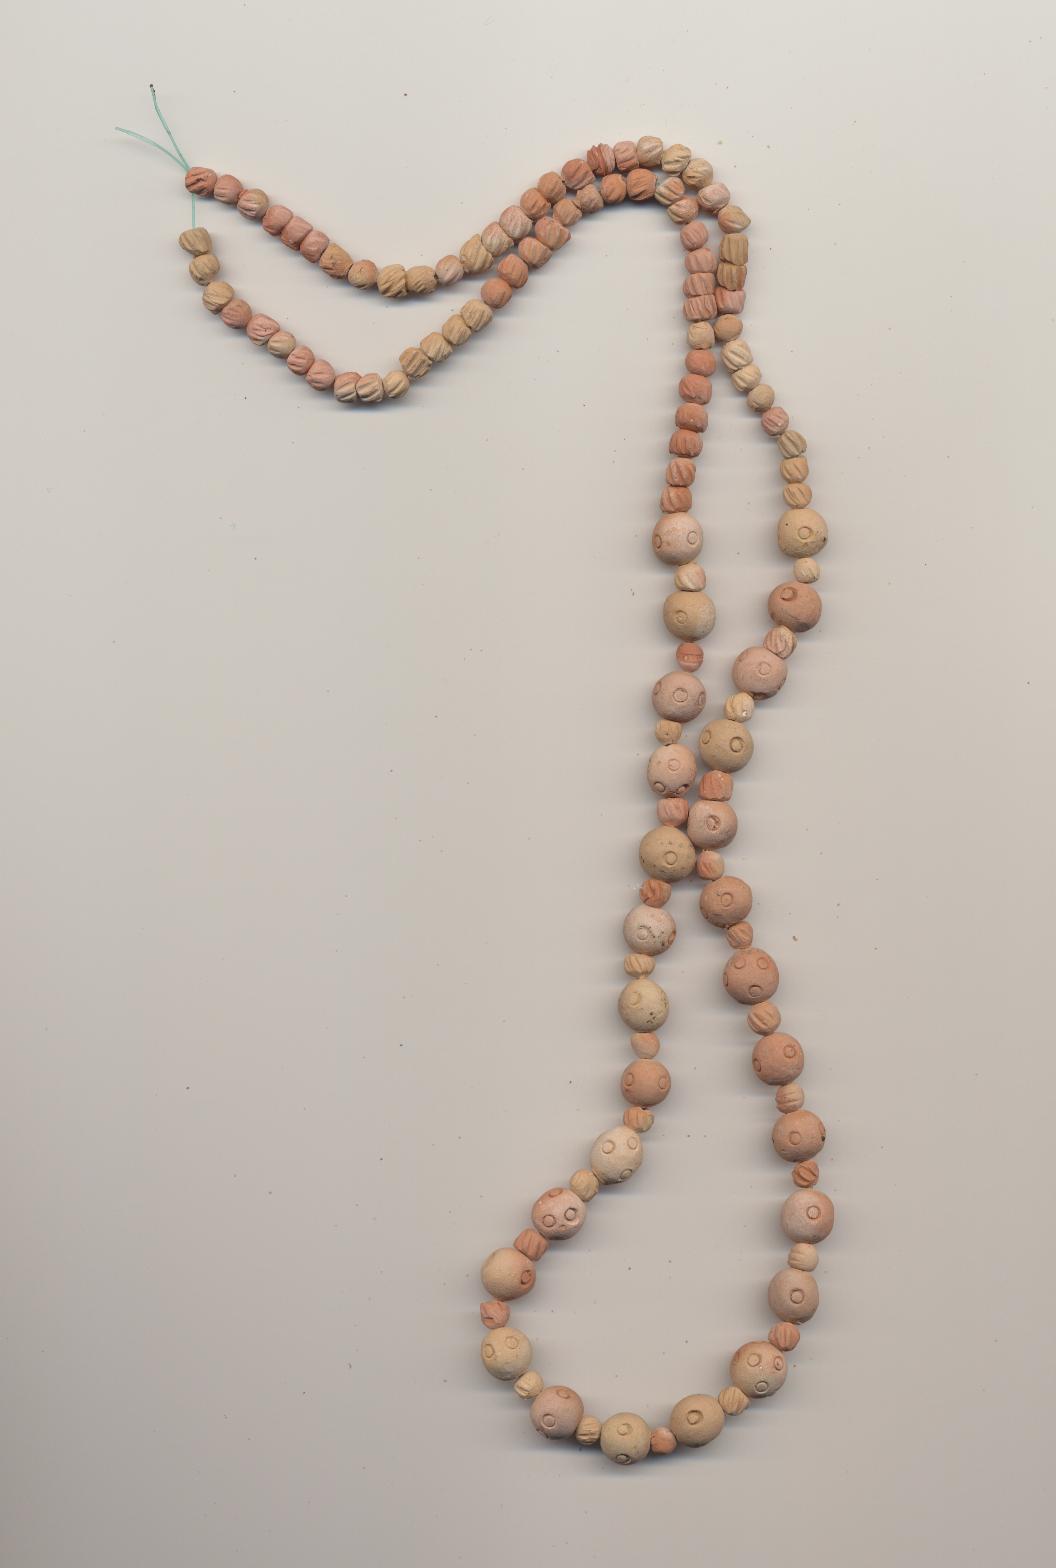 Necklace of hand made sunbaked clay beads with eye motif, Mexico, 1990's, length 28'' 70cm.